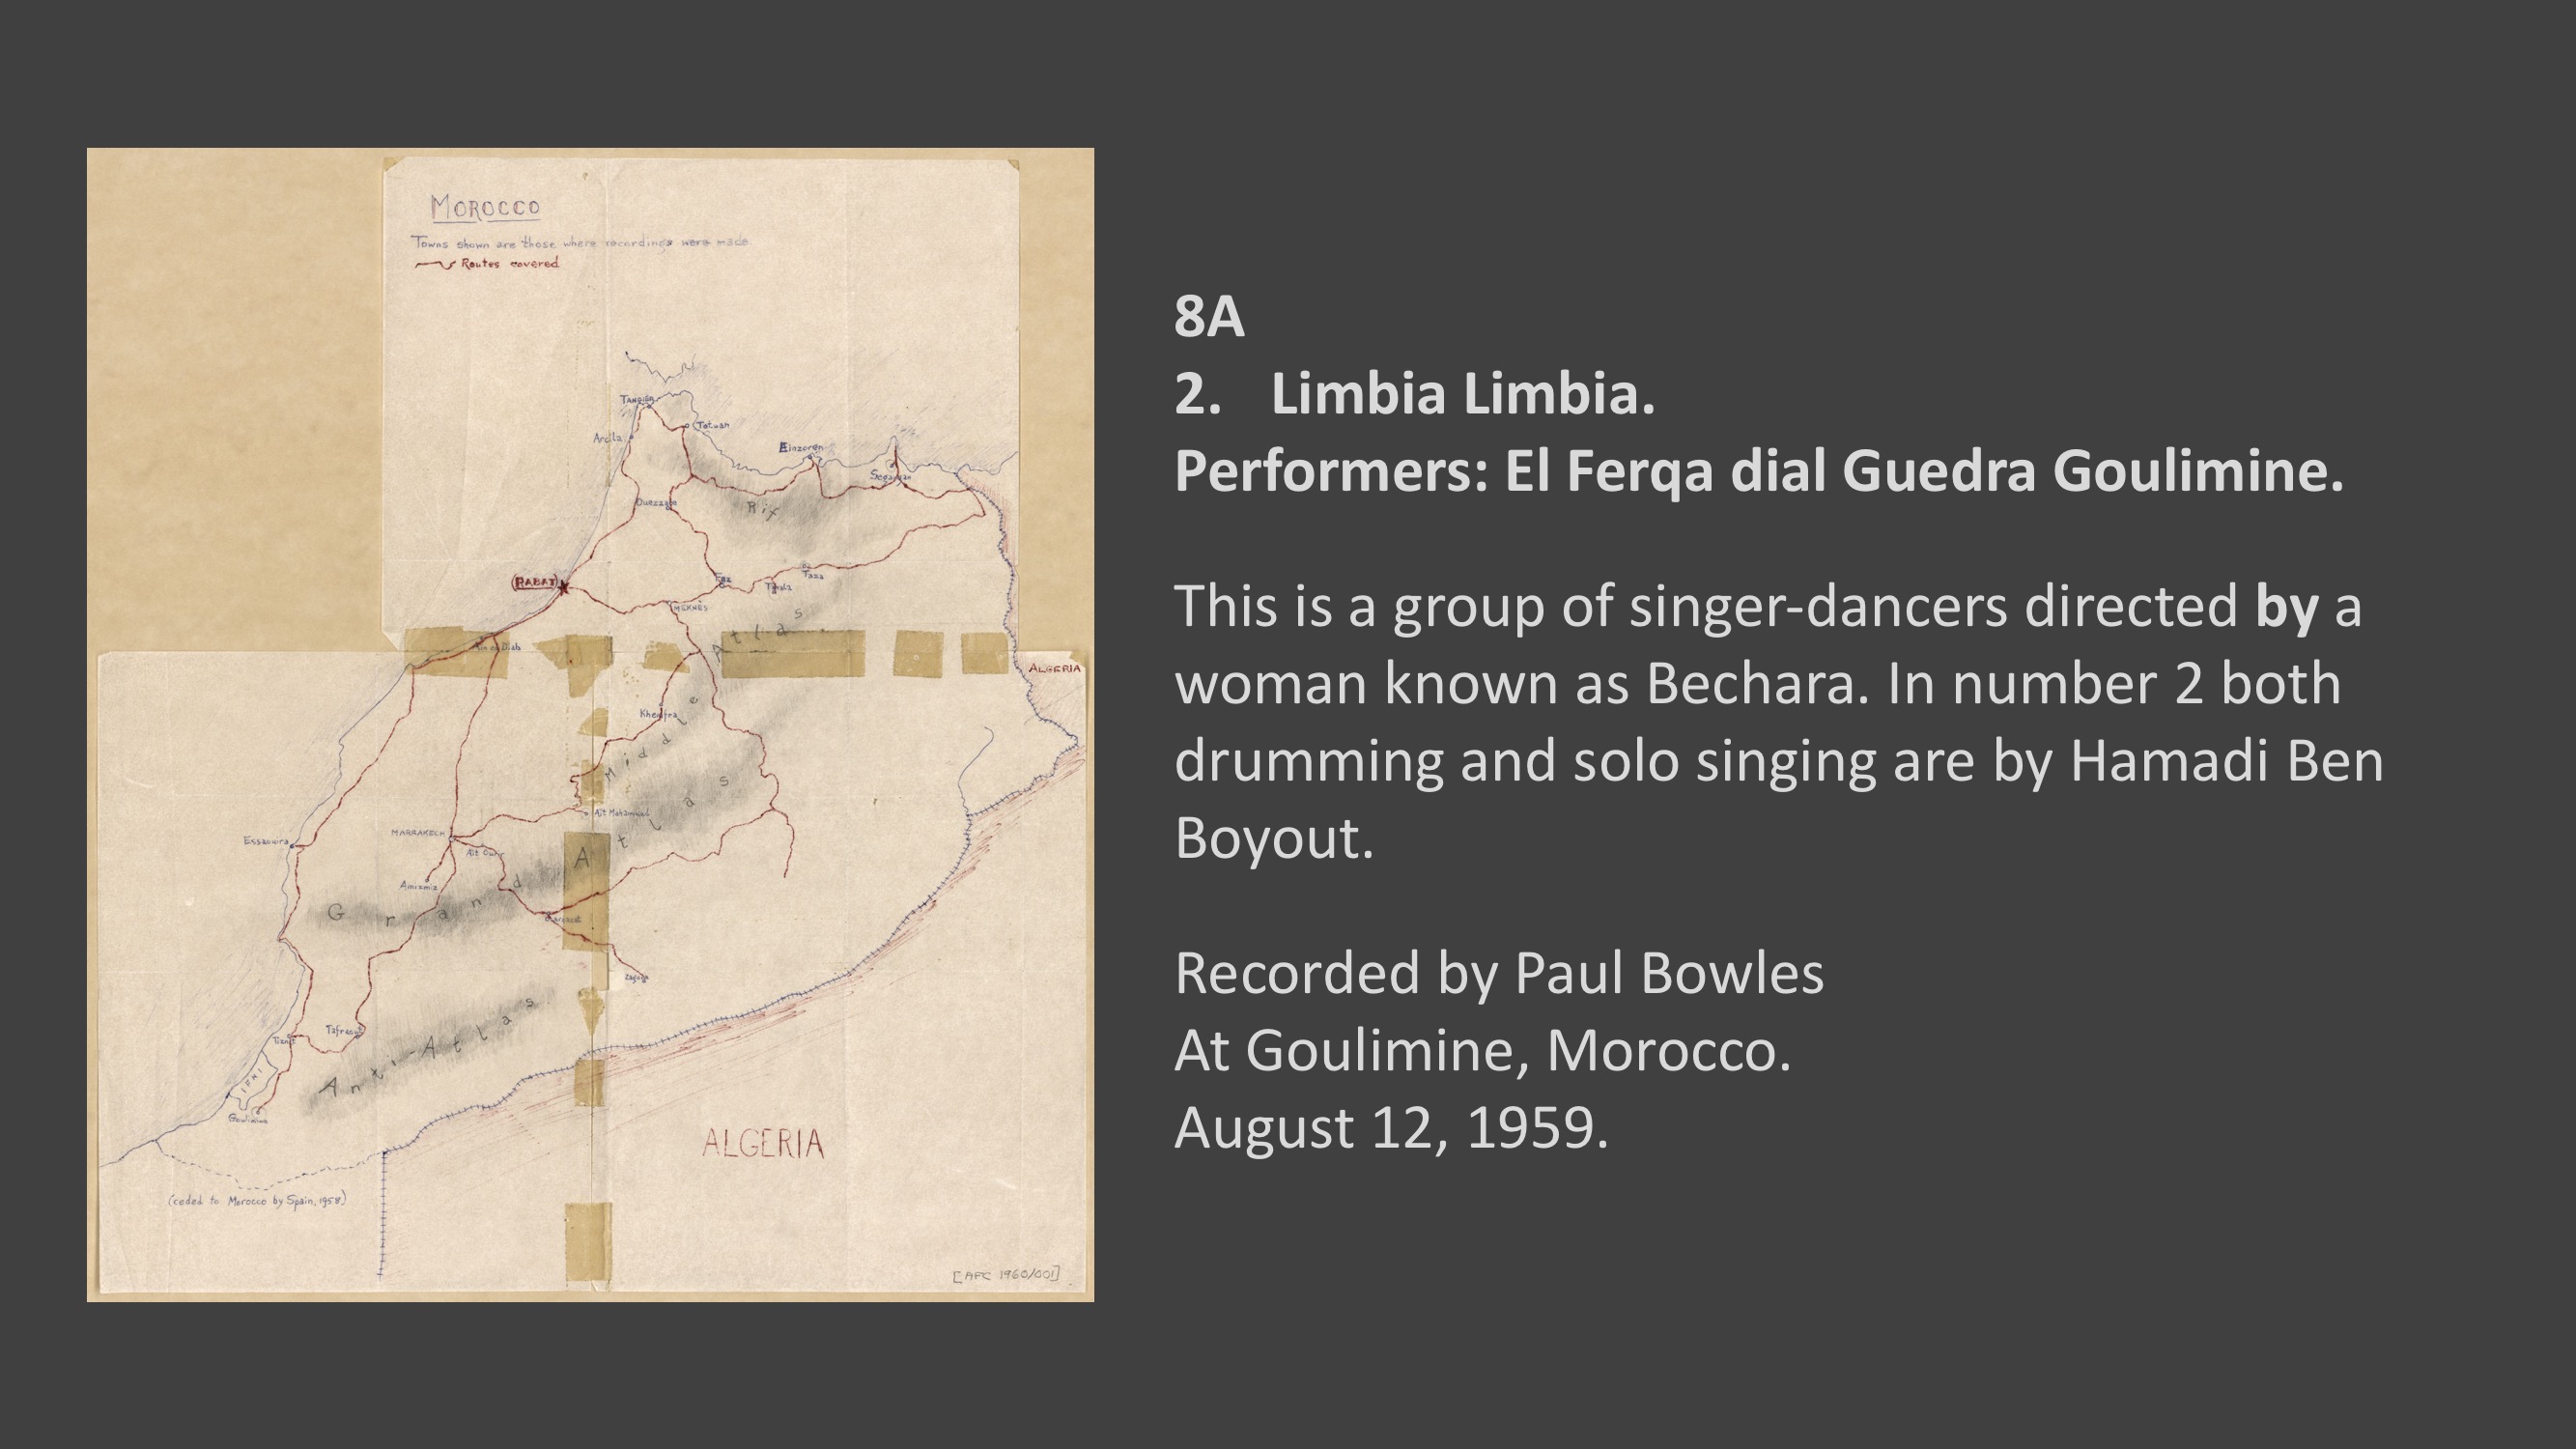 8A.2 Guennou Ouahib Bouir.
Performers: El Ferqa dial Guedra Goulimine 

In number 2 both drumming and solo singing are by Hamadi Ben Boyout.


Recorded by Paul Bowles at Goulimine, Moroccan Sahara.
August 12, 1959
